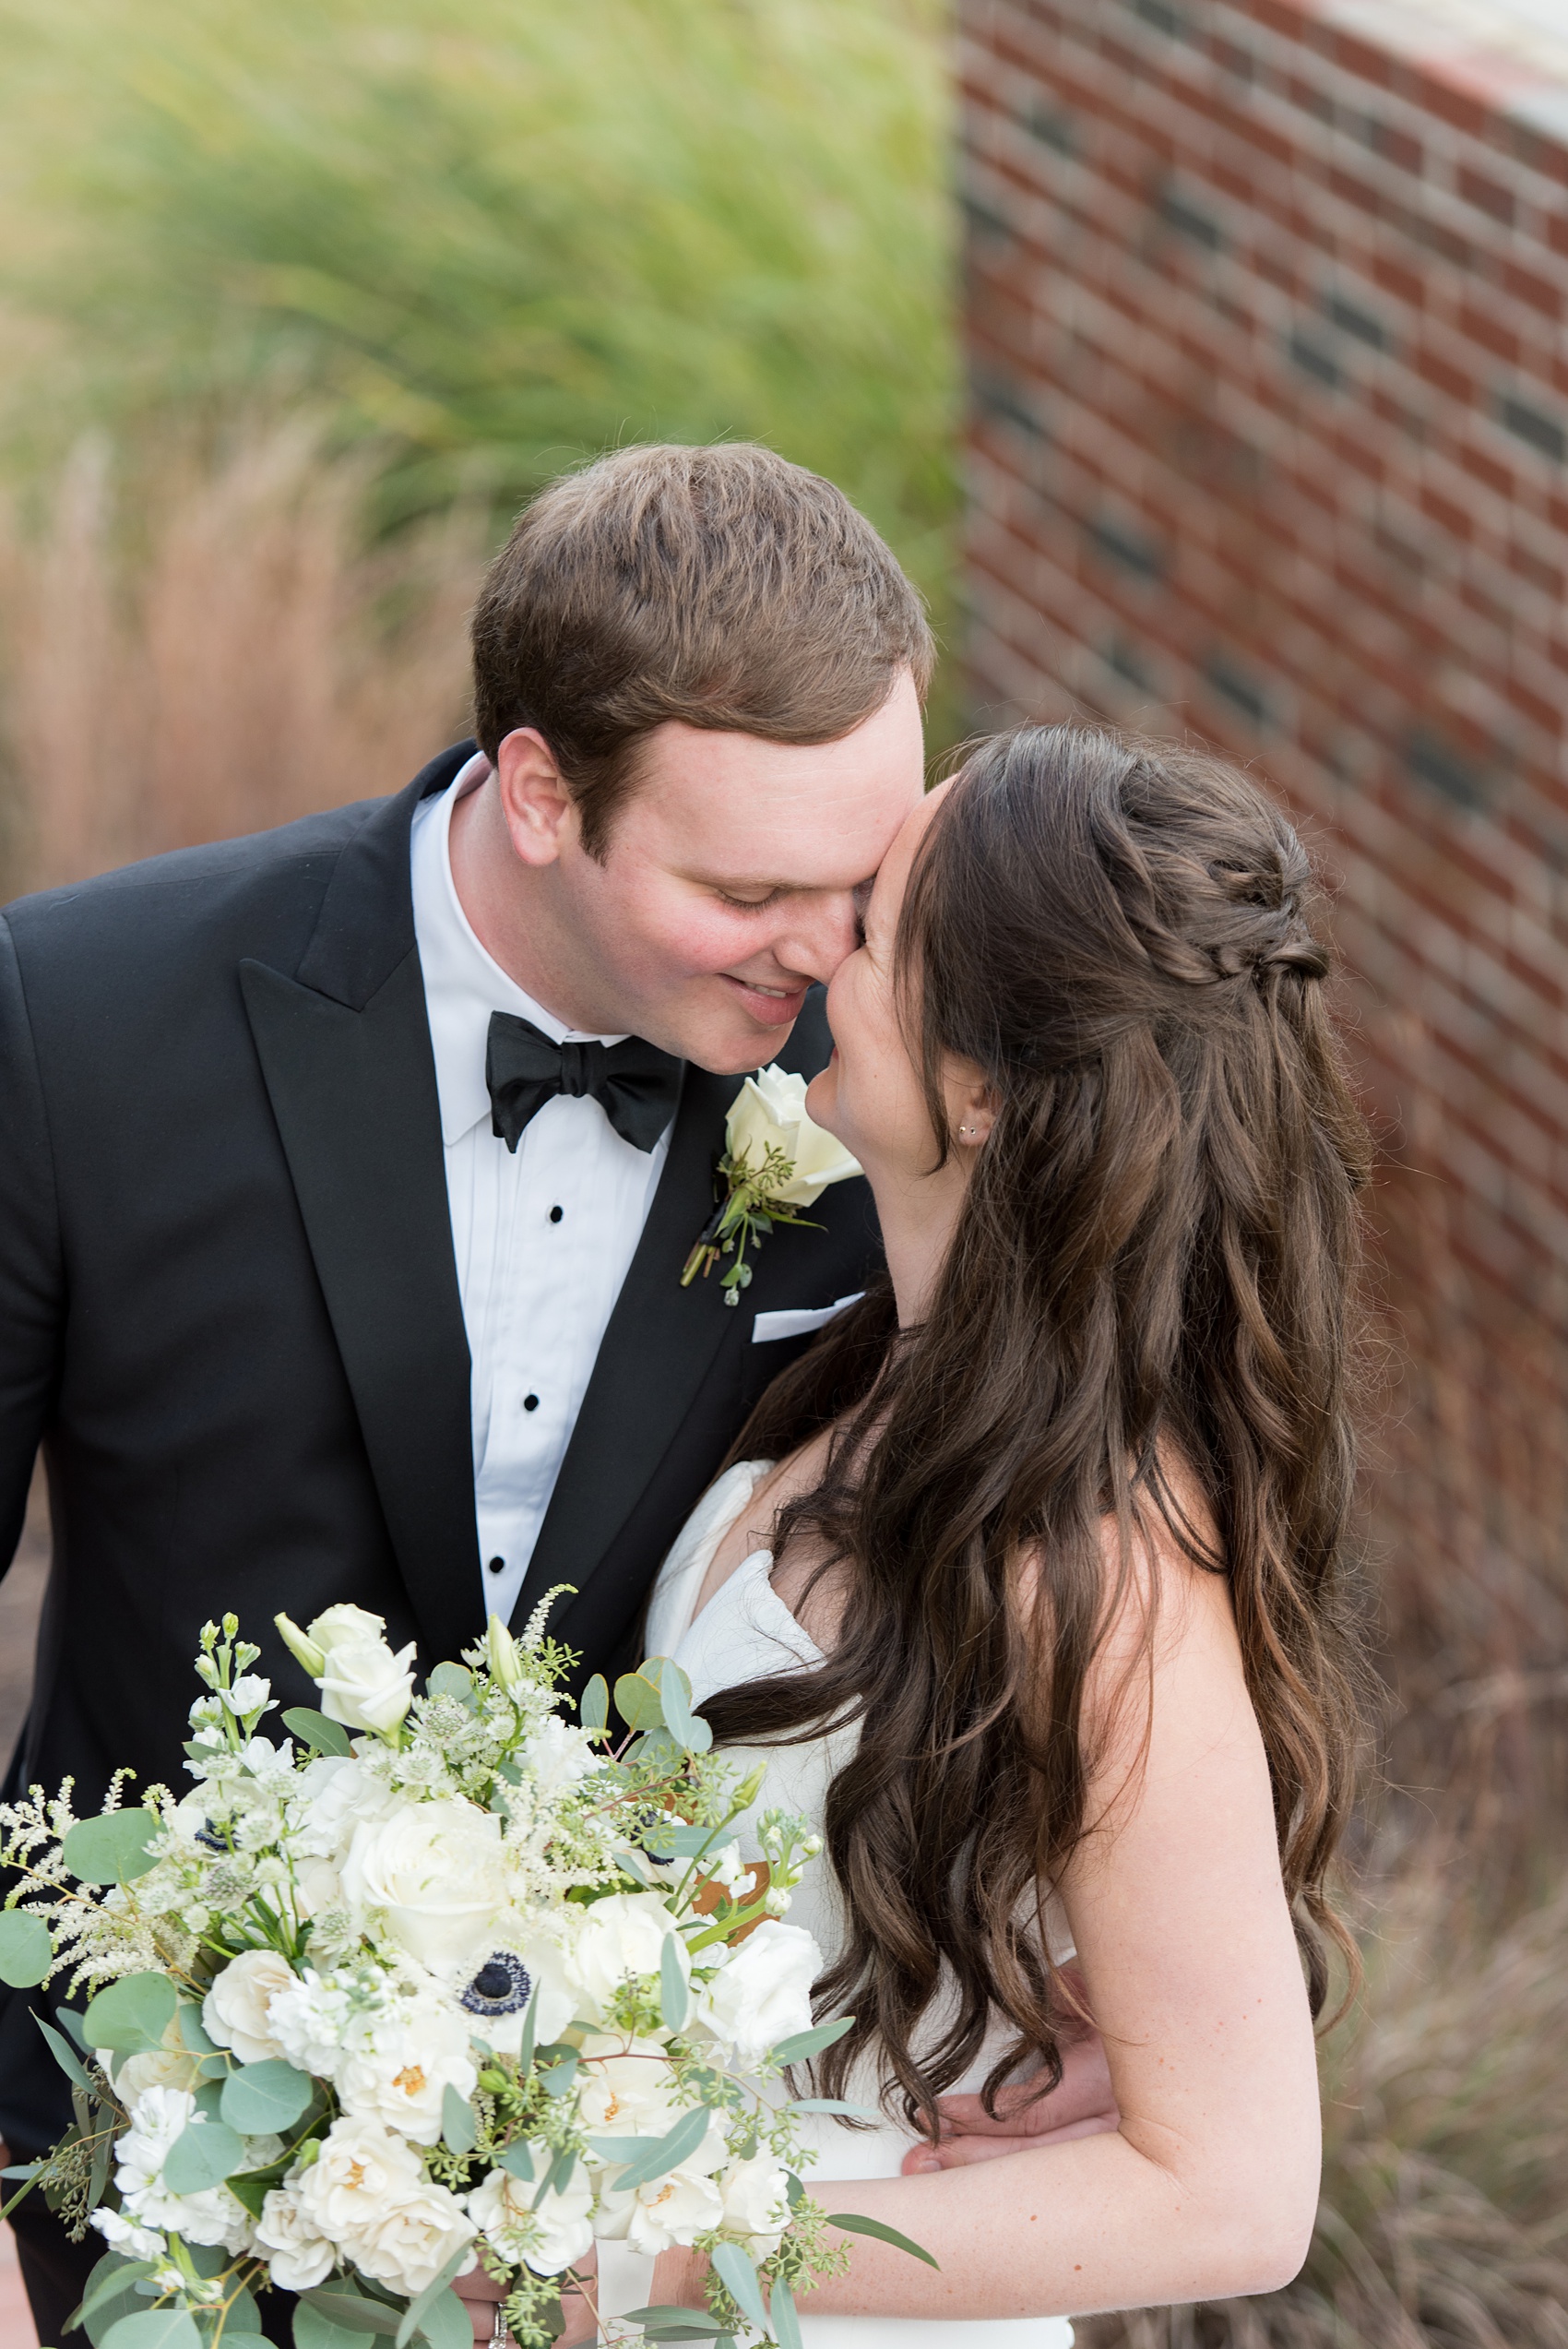 Beautiful wedding photos at The Carolina Inn at Chapel Hill, North Carolina by Mikkel Paige Photography. This venue has beautiful indoor and outdoor picture locations for ceremony, reception and bride and groom images. #thecarolinainn #chapelhillweddingphotos #chapelhillwedding #southernwedding #mikkelpaige #southernwedding